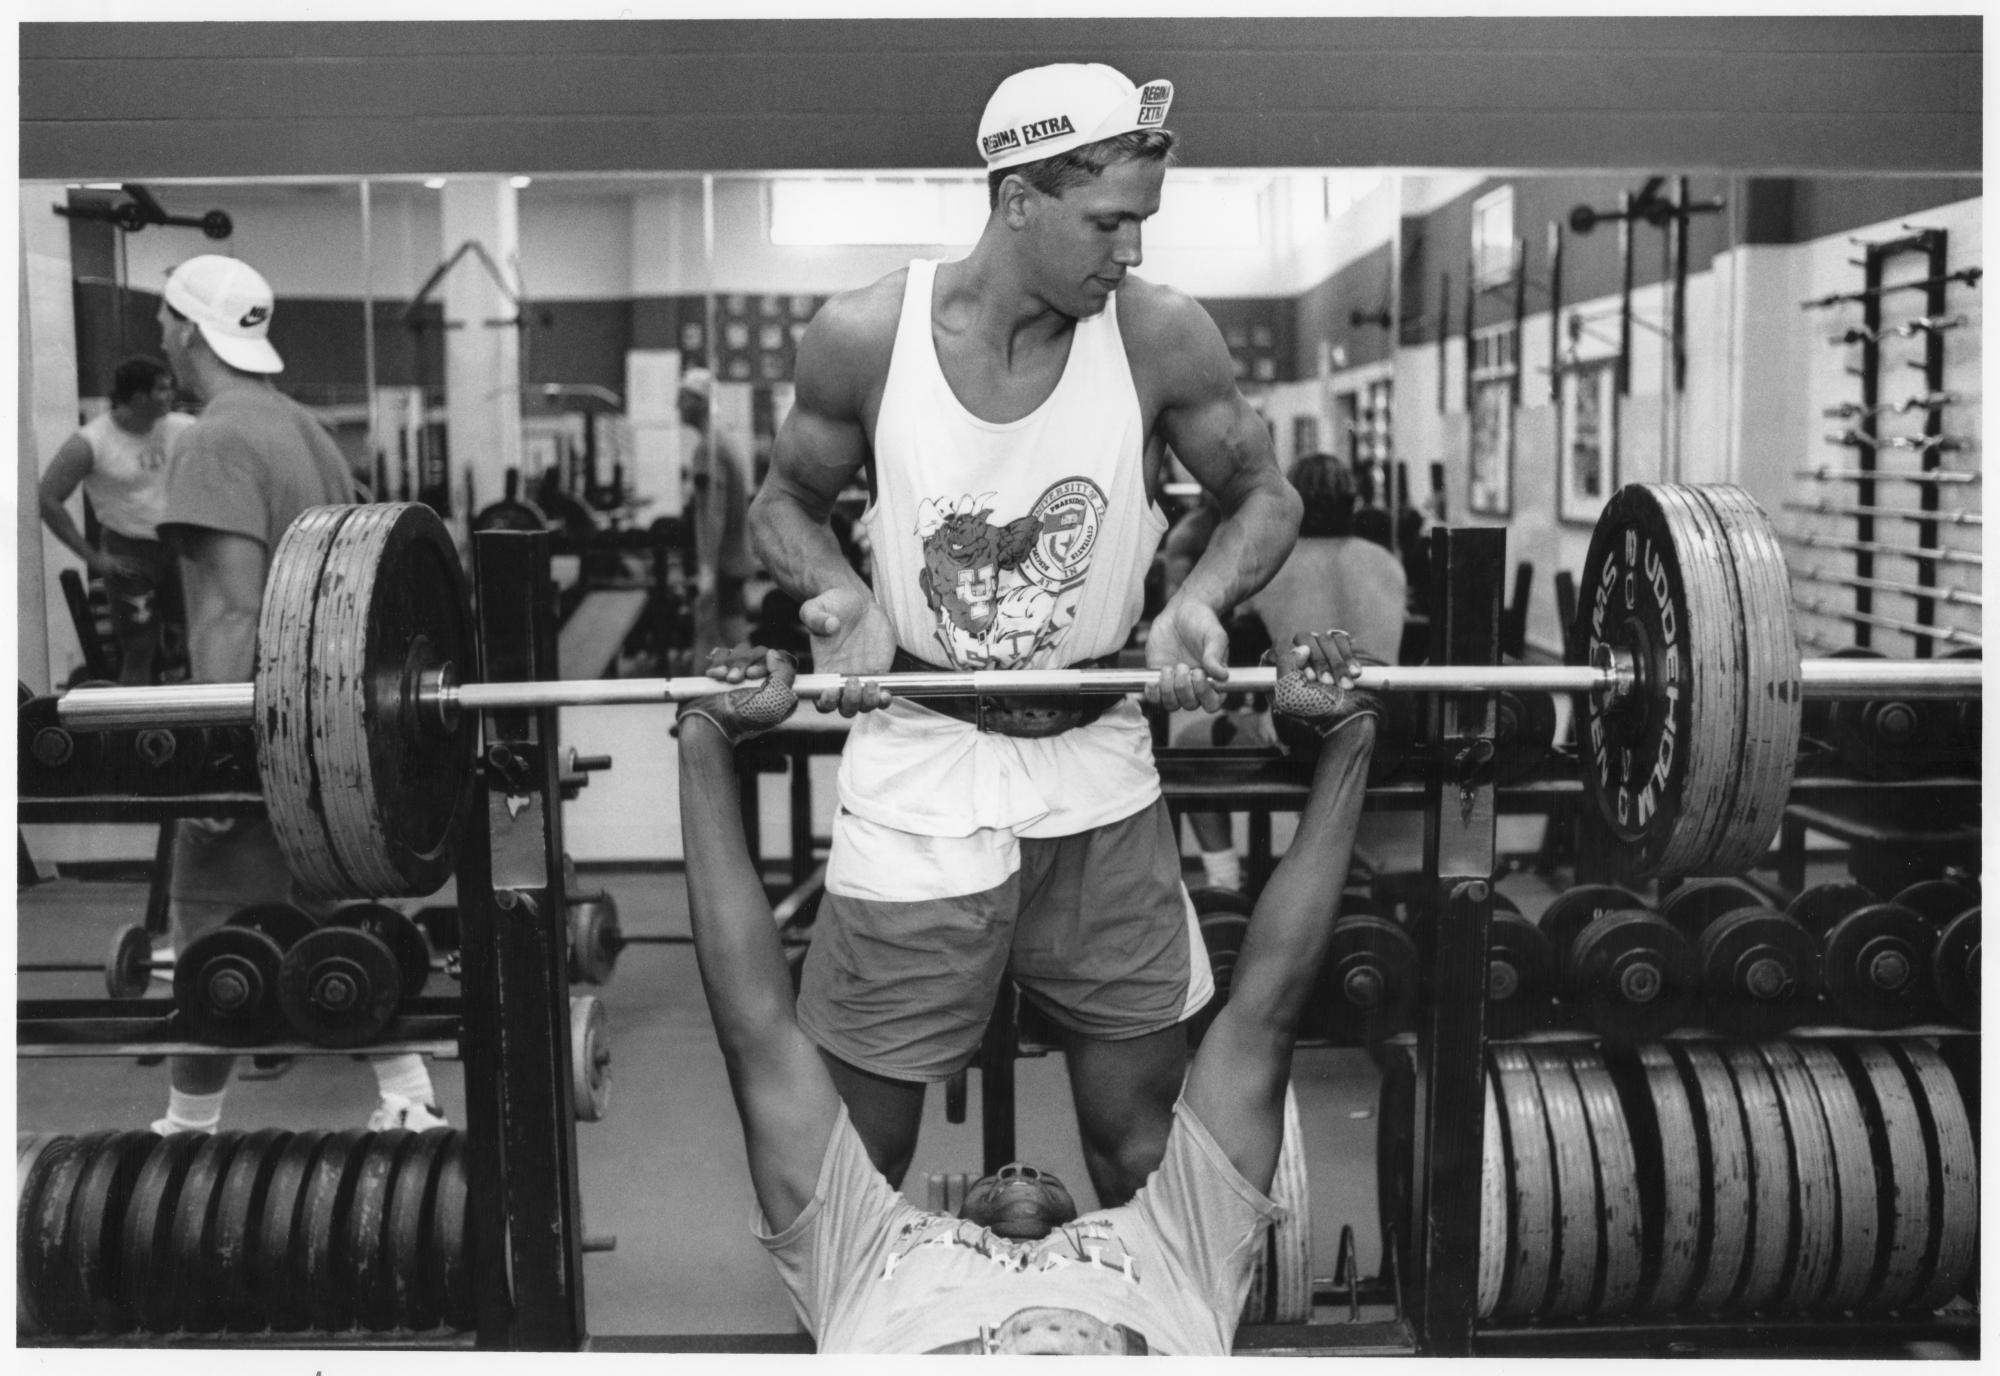 Daily Texan (1990 #1) - Weight Training